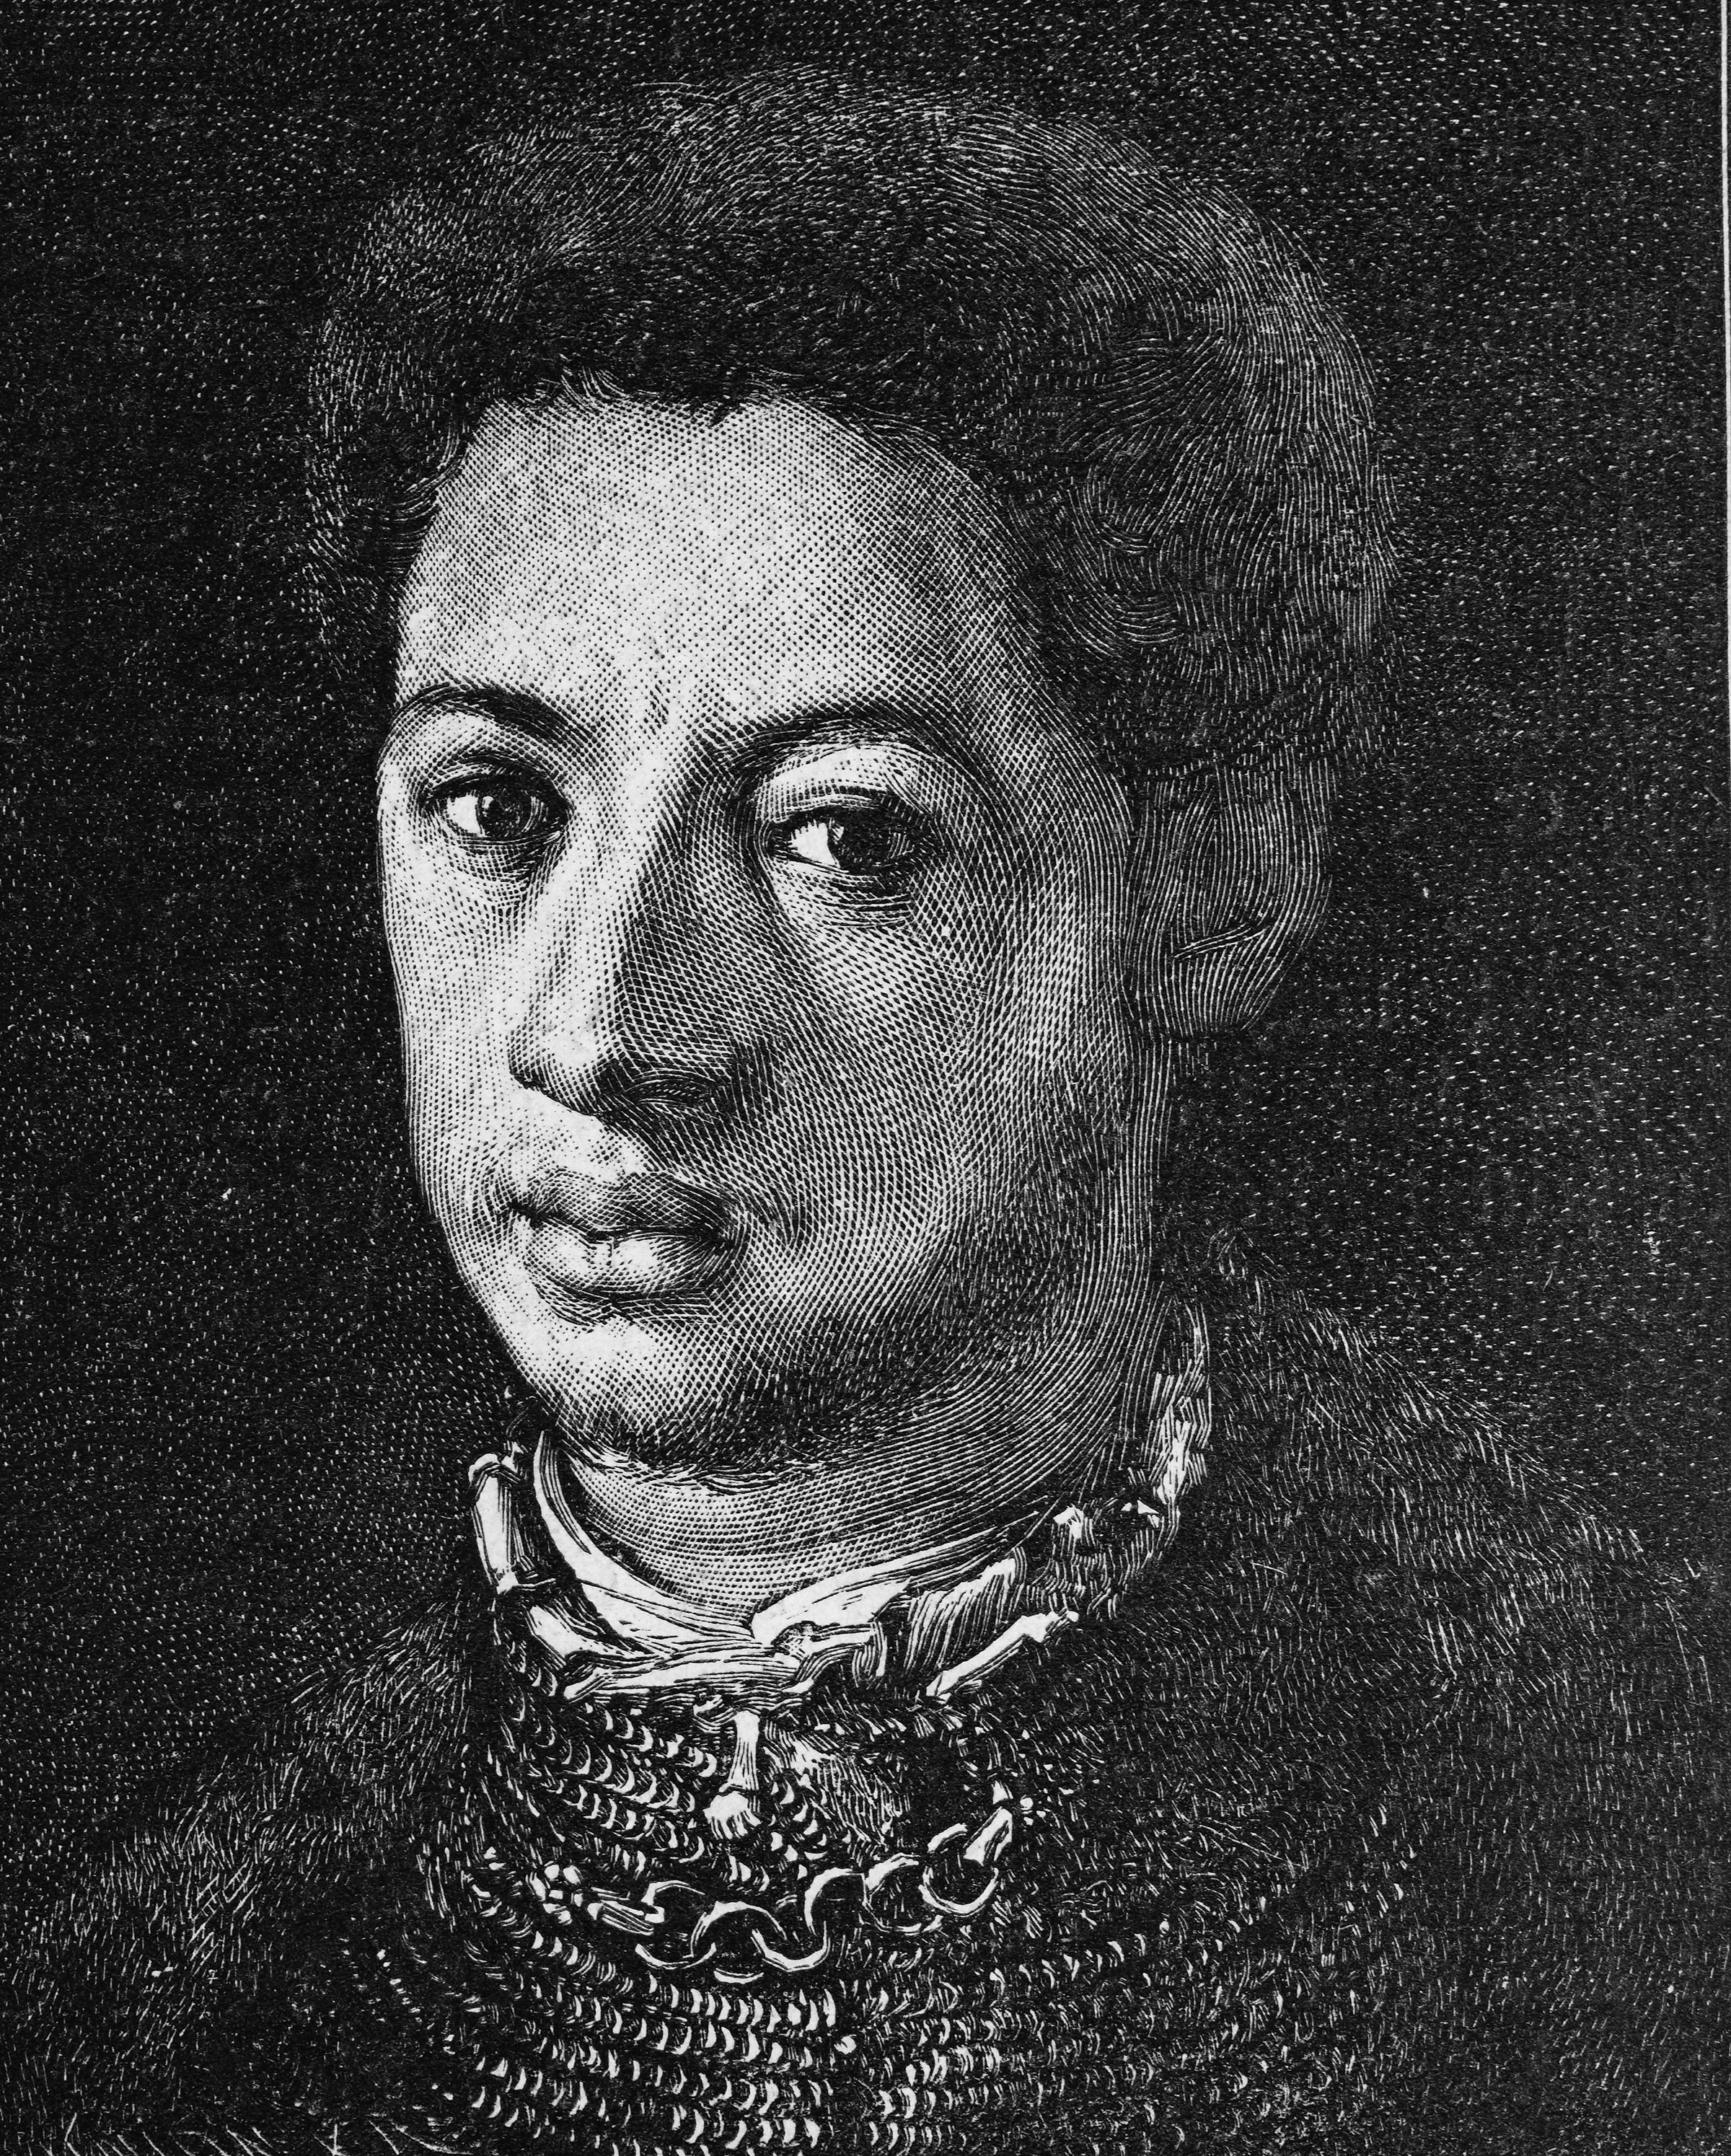 A wood engraving of Alessandro de' Medici circa 1880. (Universal Images Group/Getty Images)